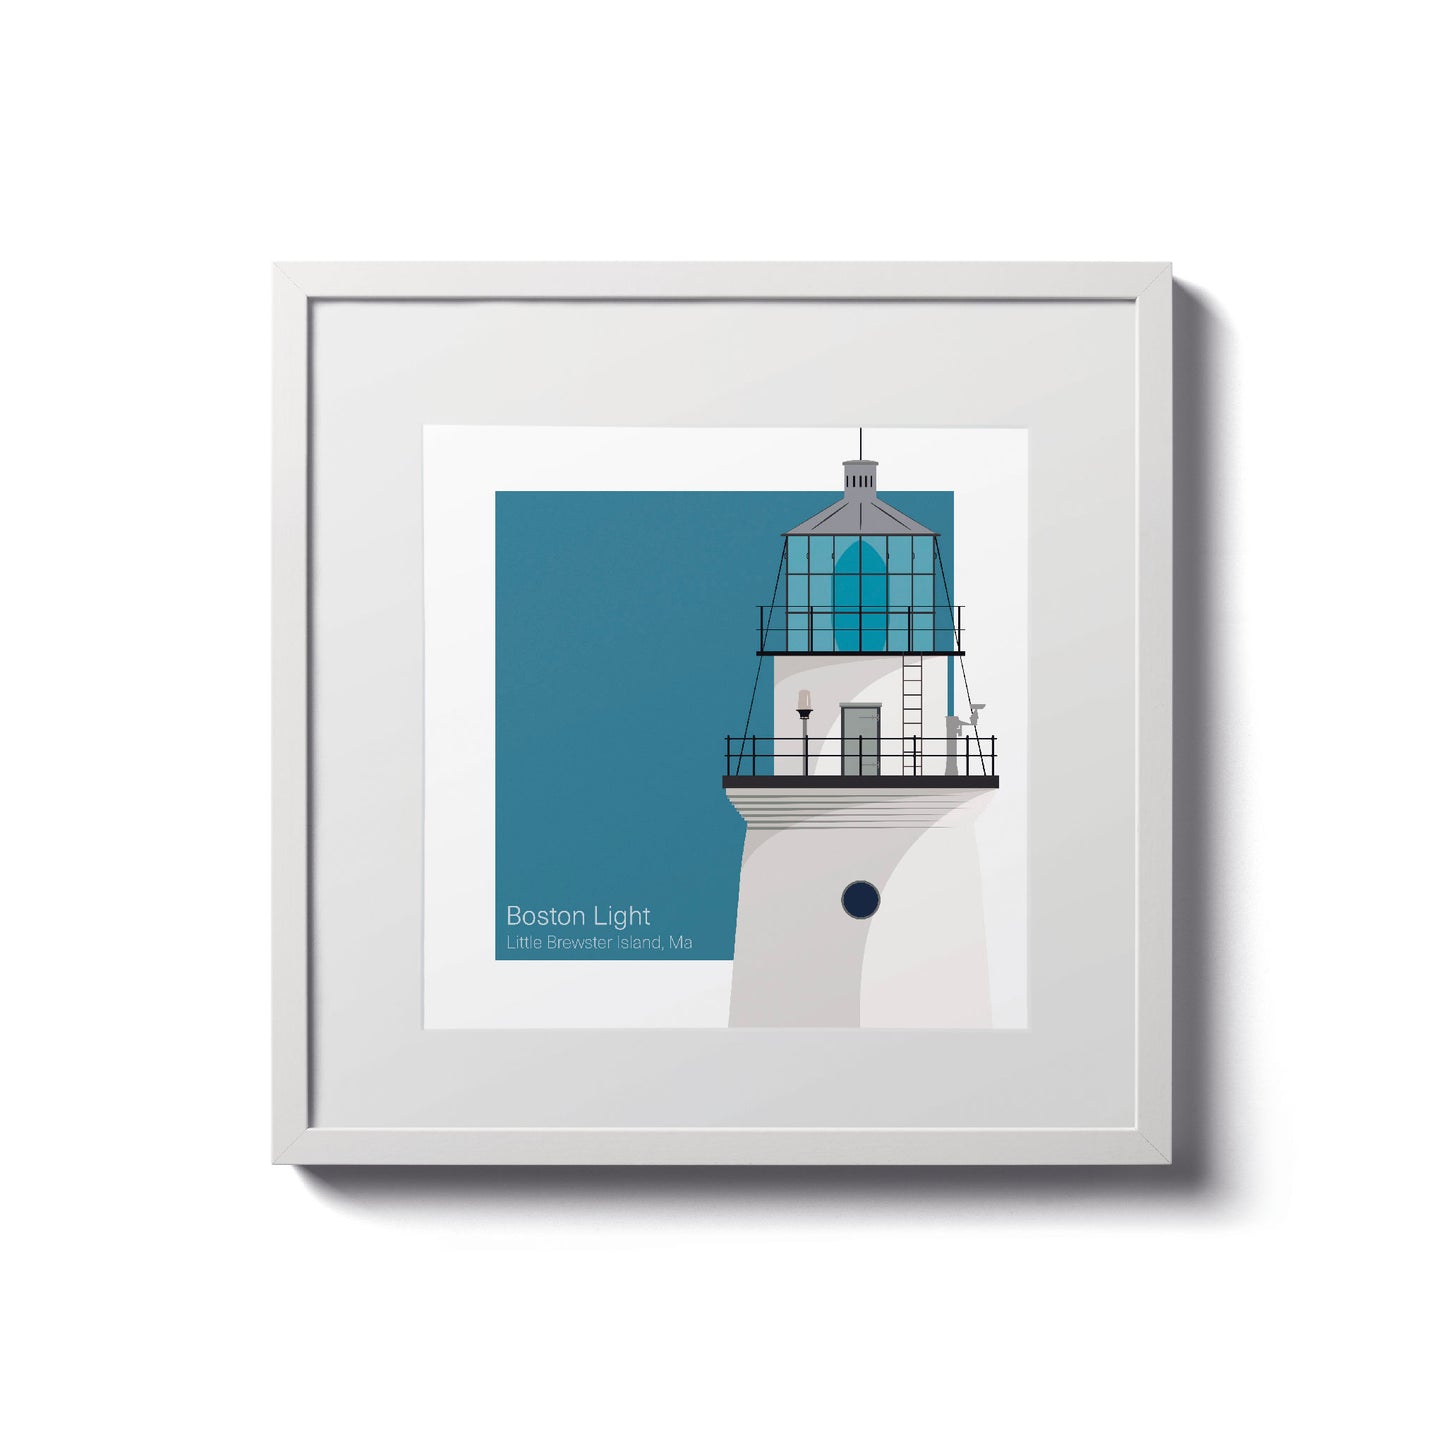 Illustration of the Boston Light lighthouse on Little Brewster Island, Boston, MA, USA. On a white background with aqua blue square as a backdrop., in a white frame  and measuring 8"x8" (20x20cm).